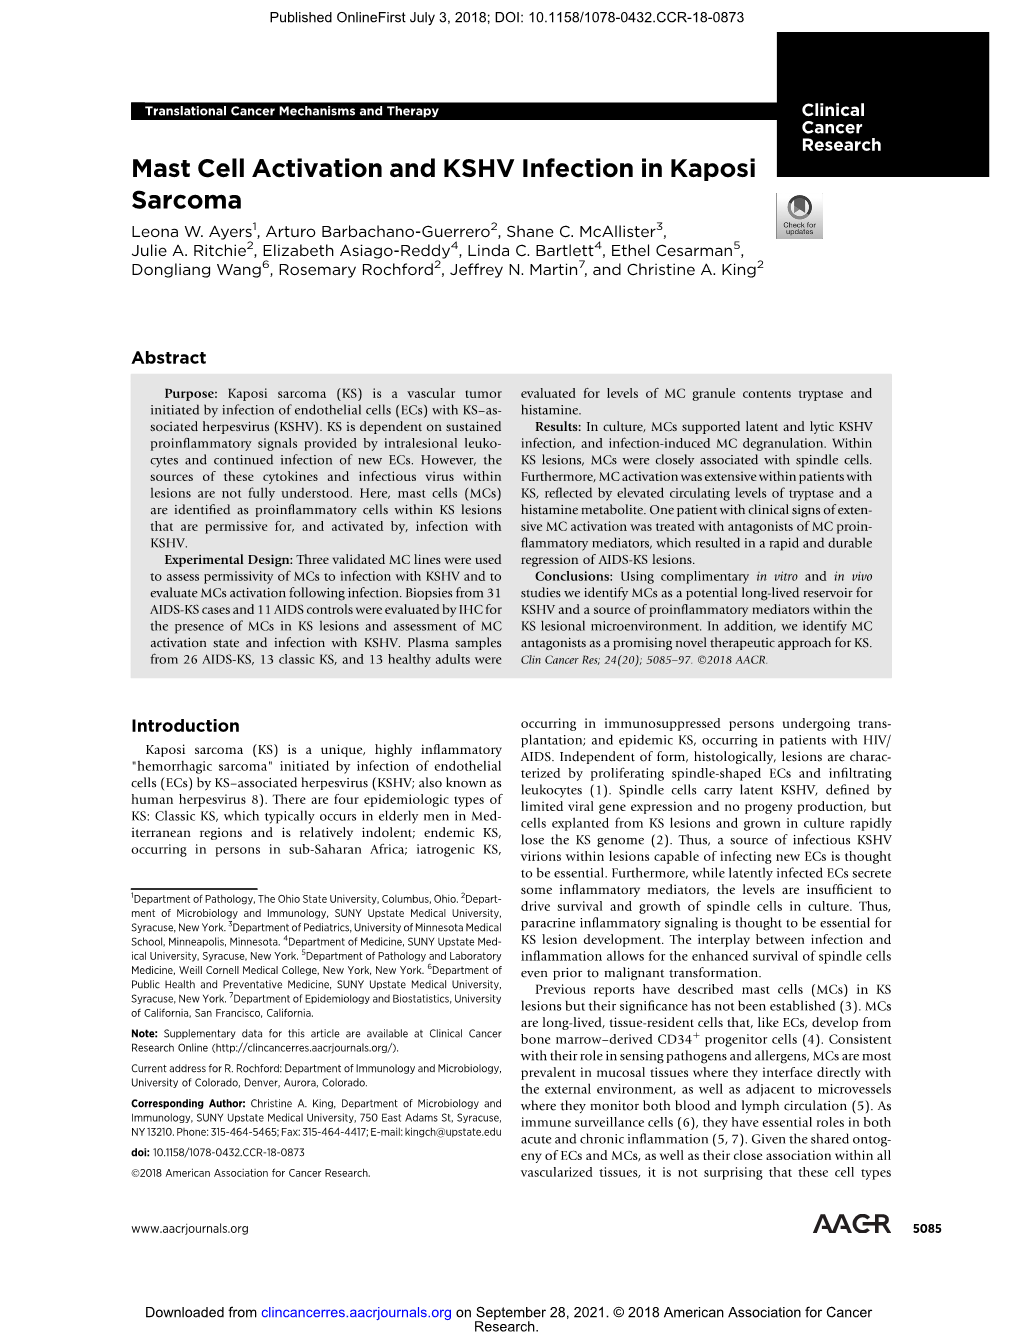 Mast Cell Activation and KSHV Infection in Kaposi Sarcoma Leona W